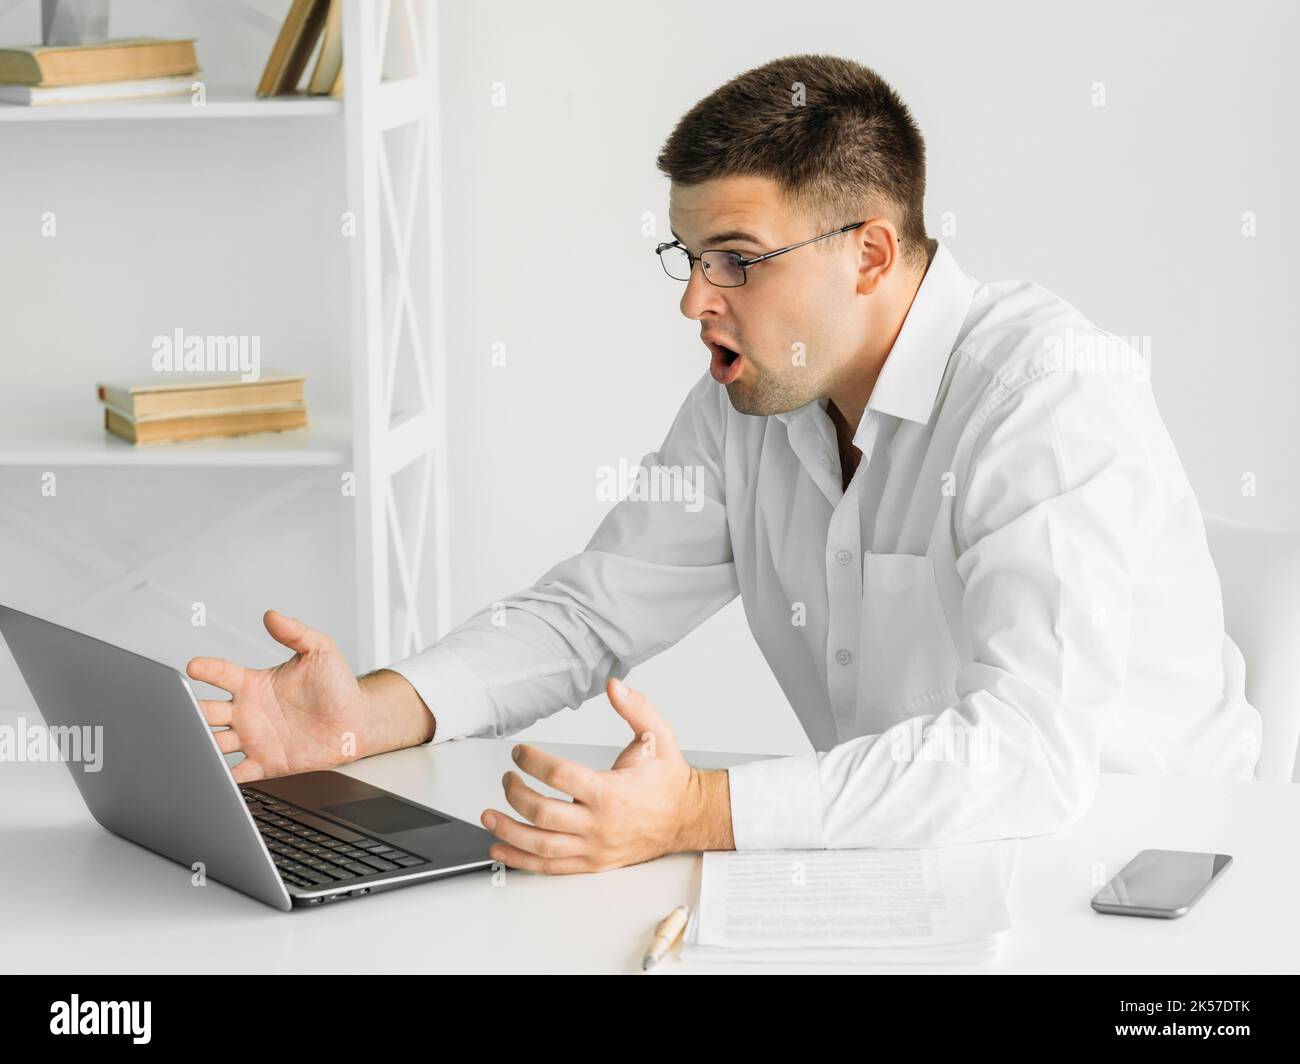 computer fail shocked man disbelief expression Stock Photo